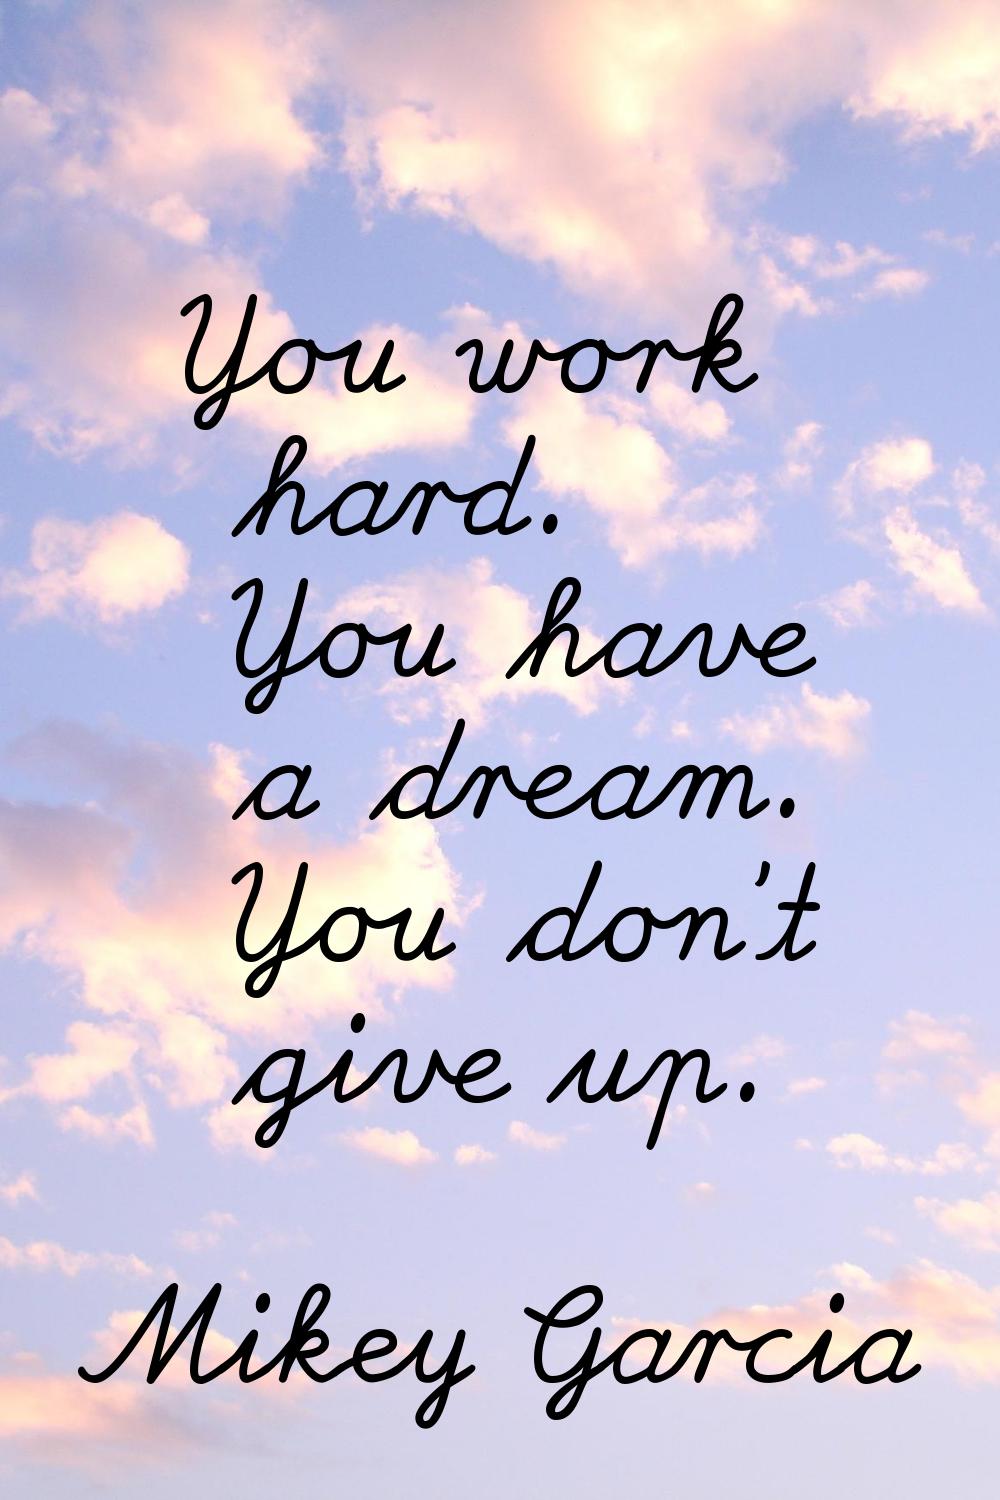 You work hard. You have a dream. You don't give up.